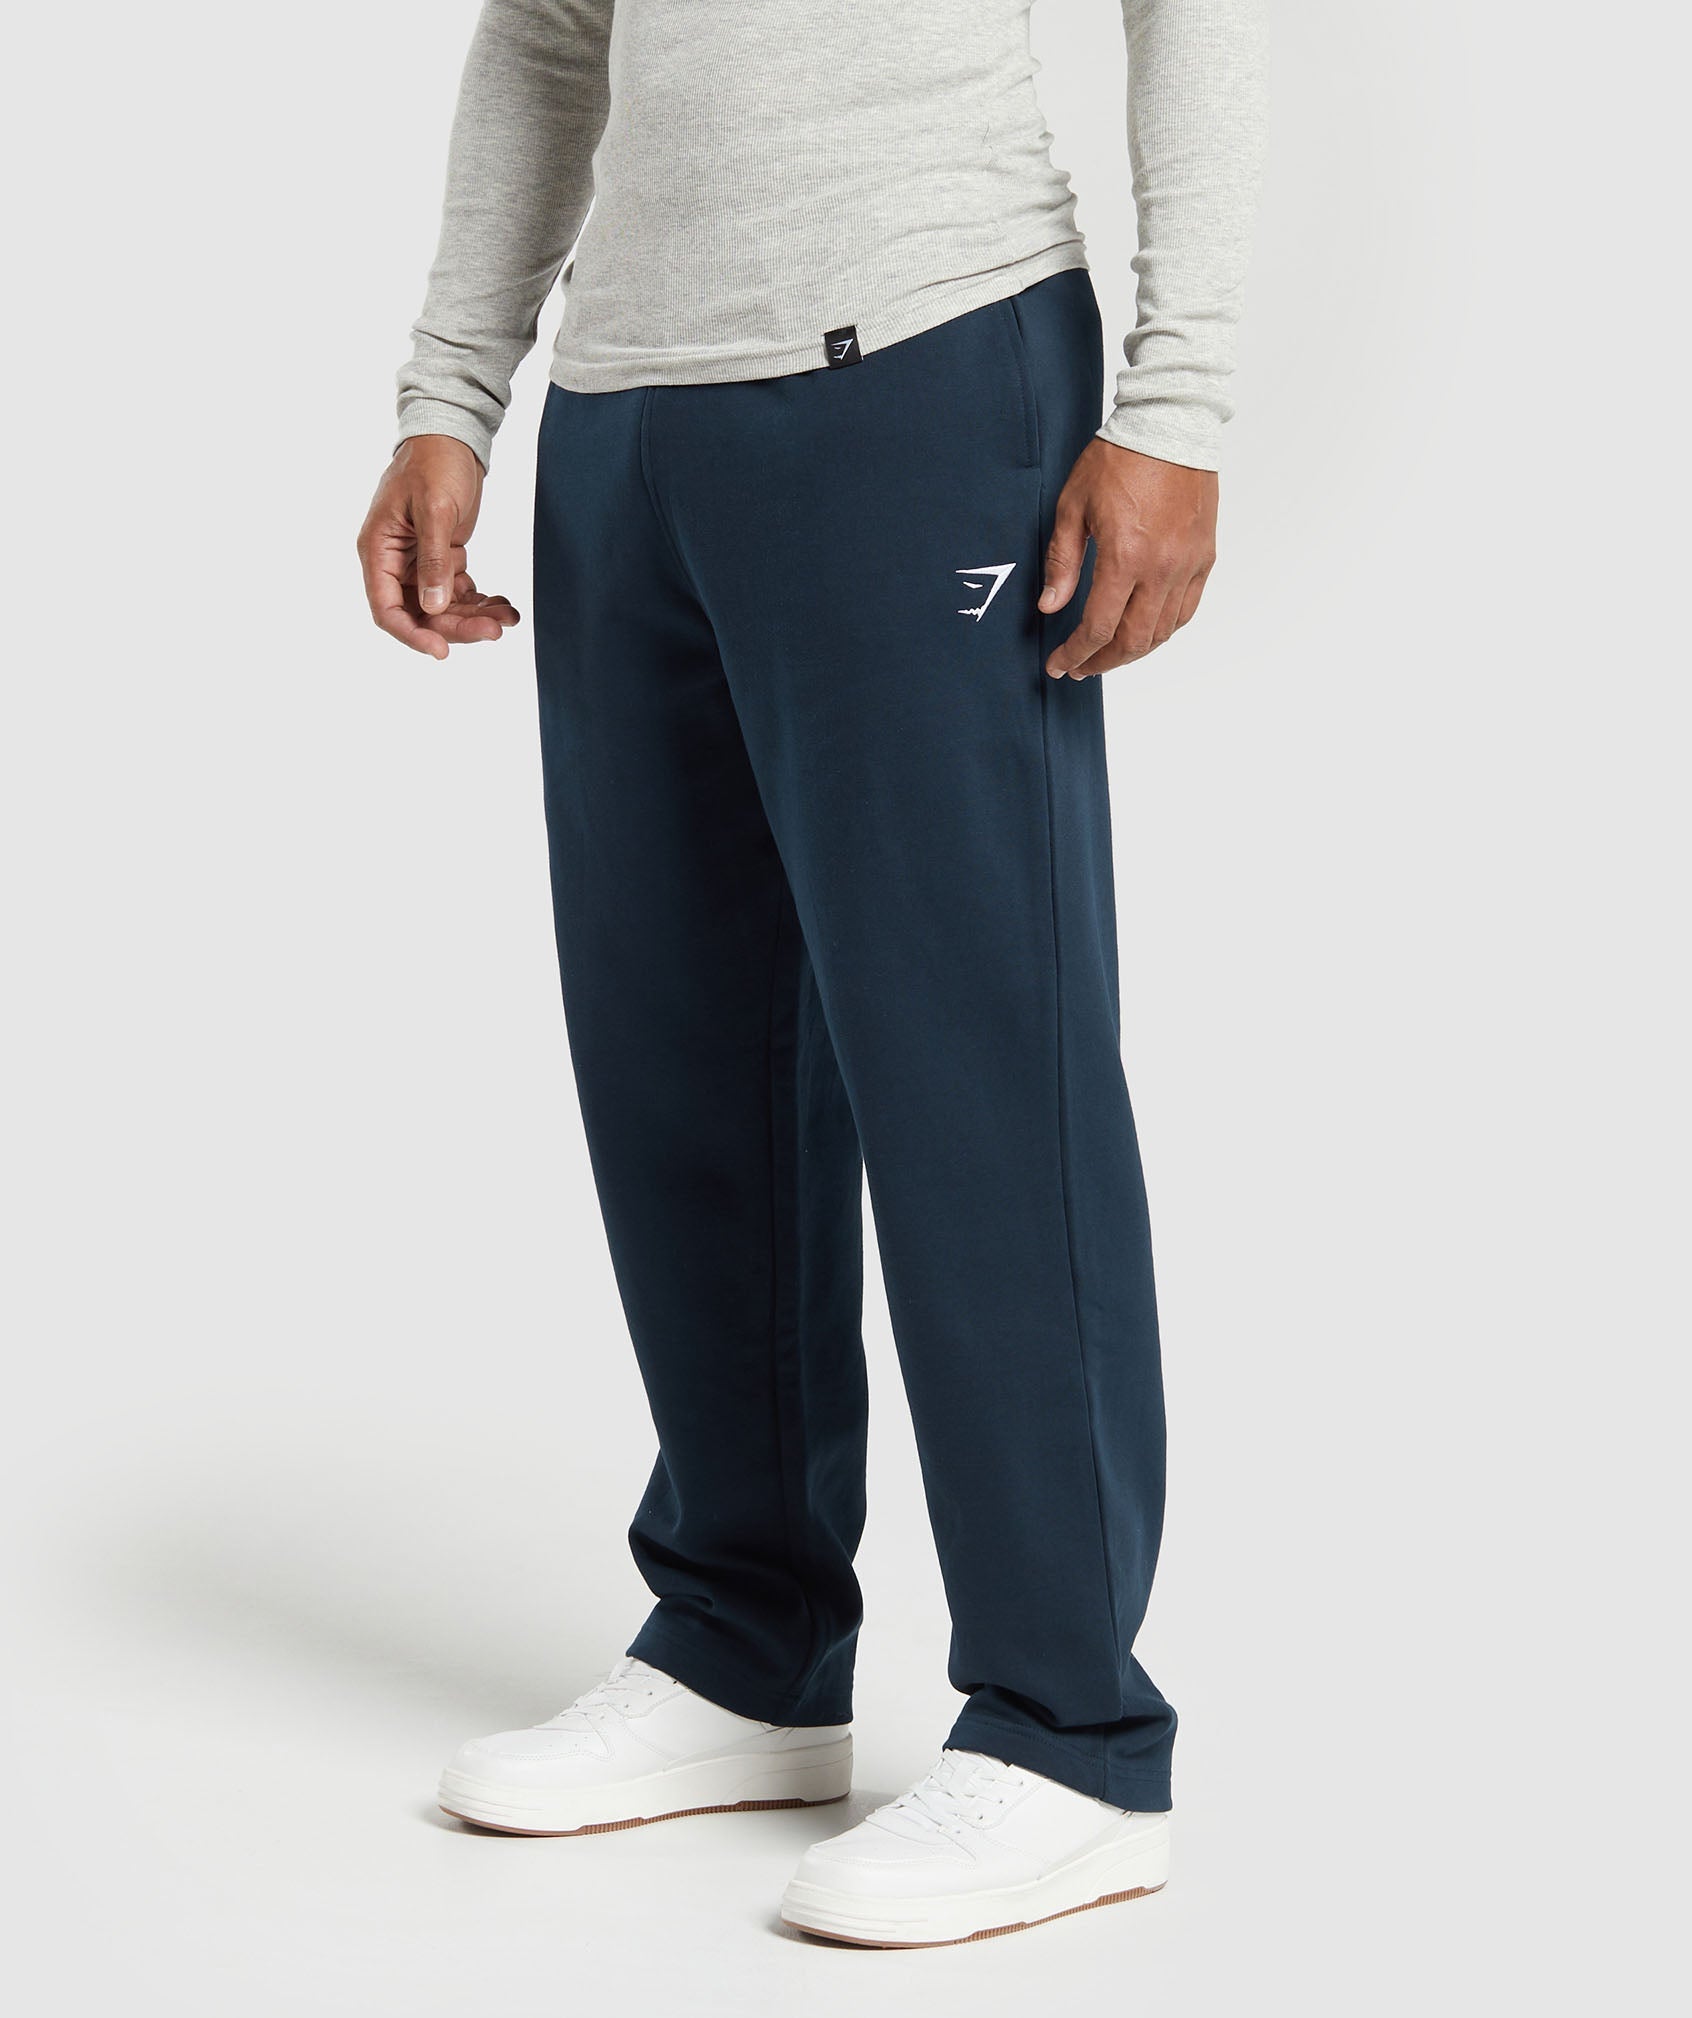 Crest Straight Leg Joggers in Navy - view 3